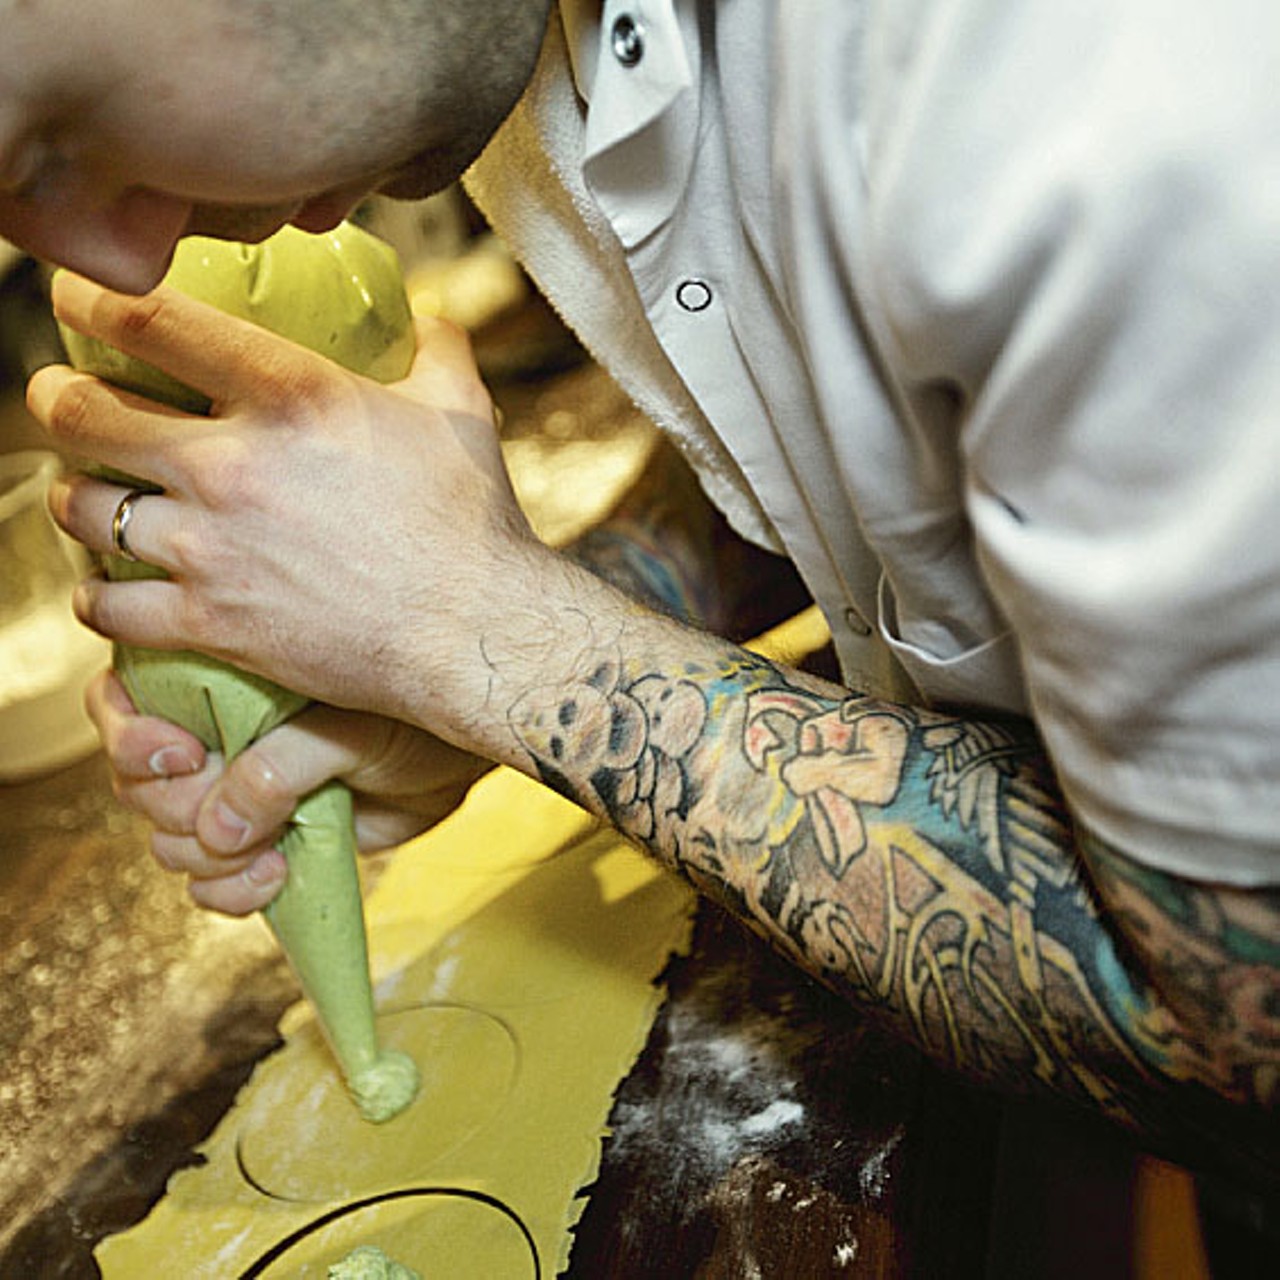 Gerard Craft of Niche restaurants was one of the restaurant workers featured in our April 21 photo essay, "Kitchen Ink: The restaurant life has a tendency to get under your skin."